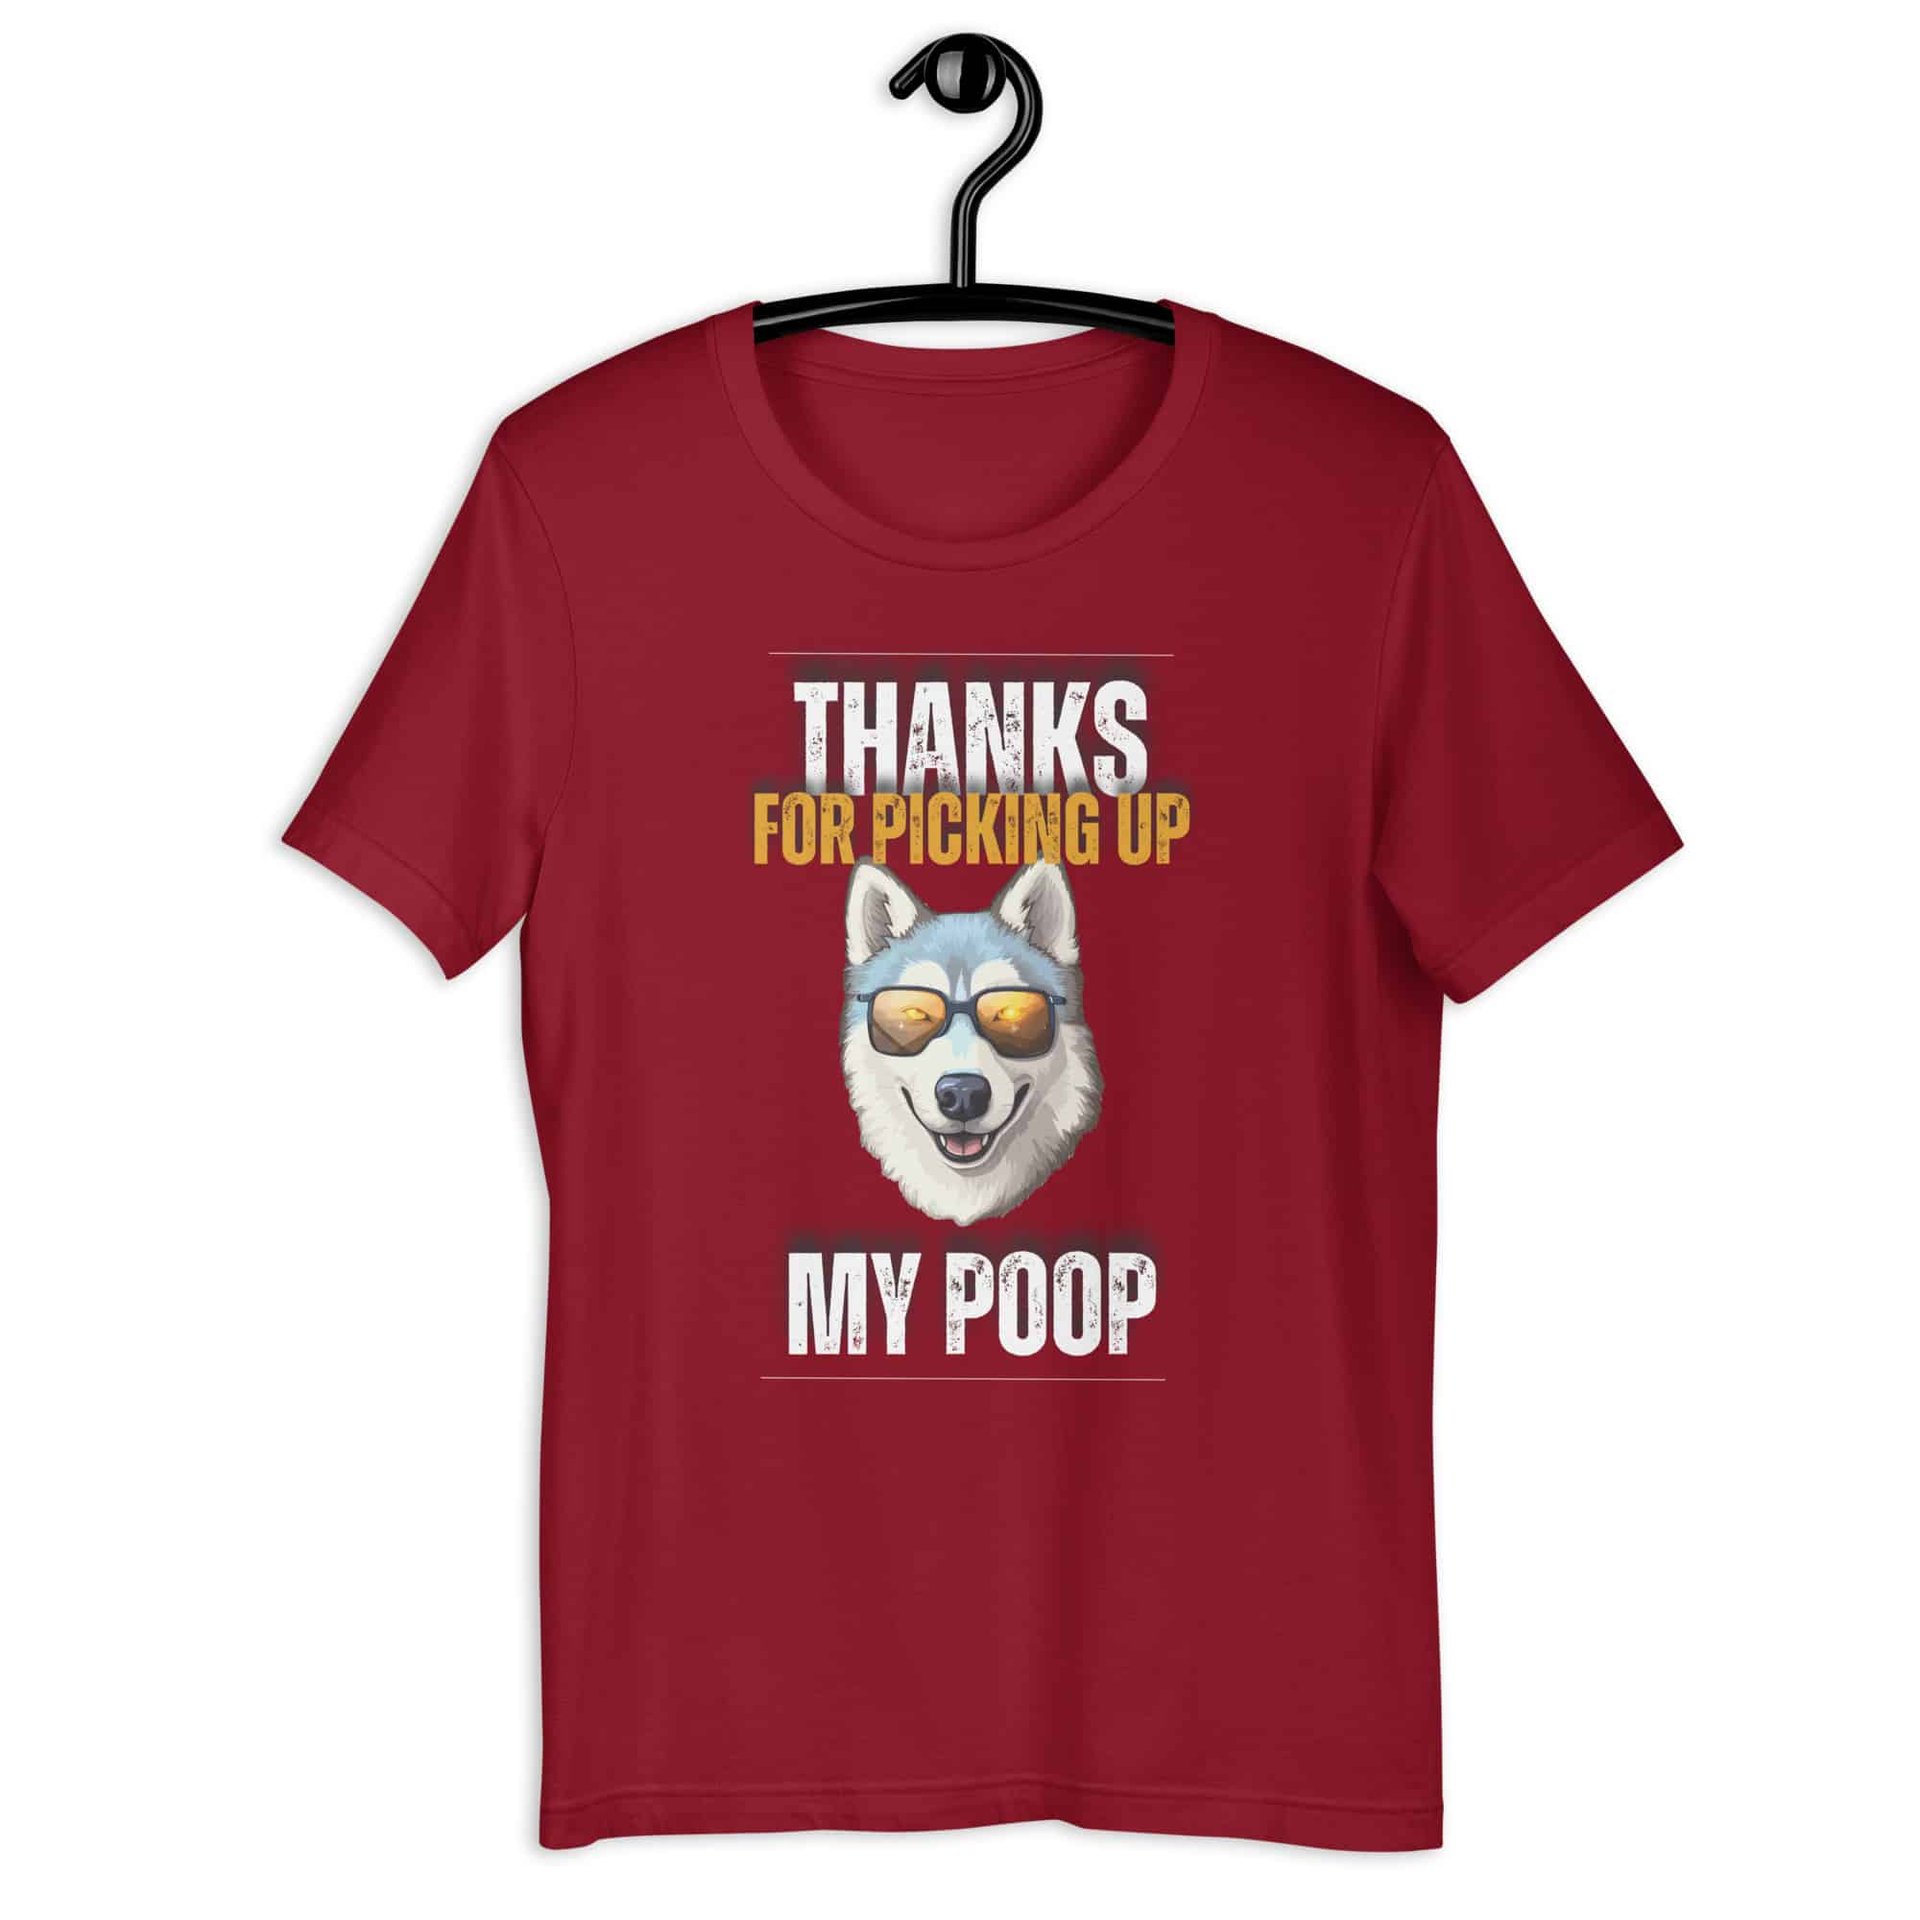 Thanks For Picking Up My POOP Funny Huskies Unisex T-Shirt. Cardinal